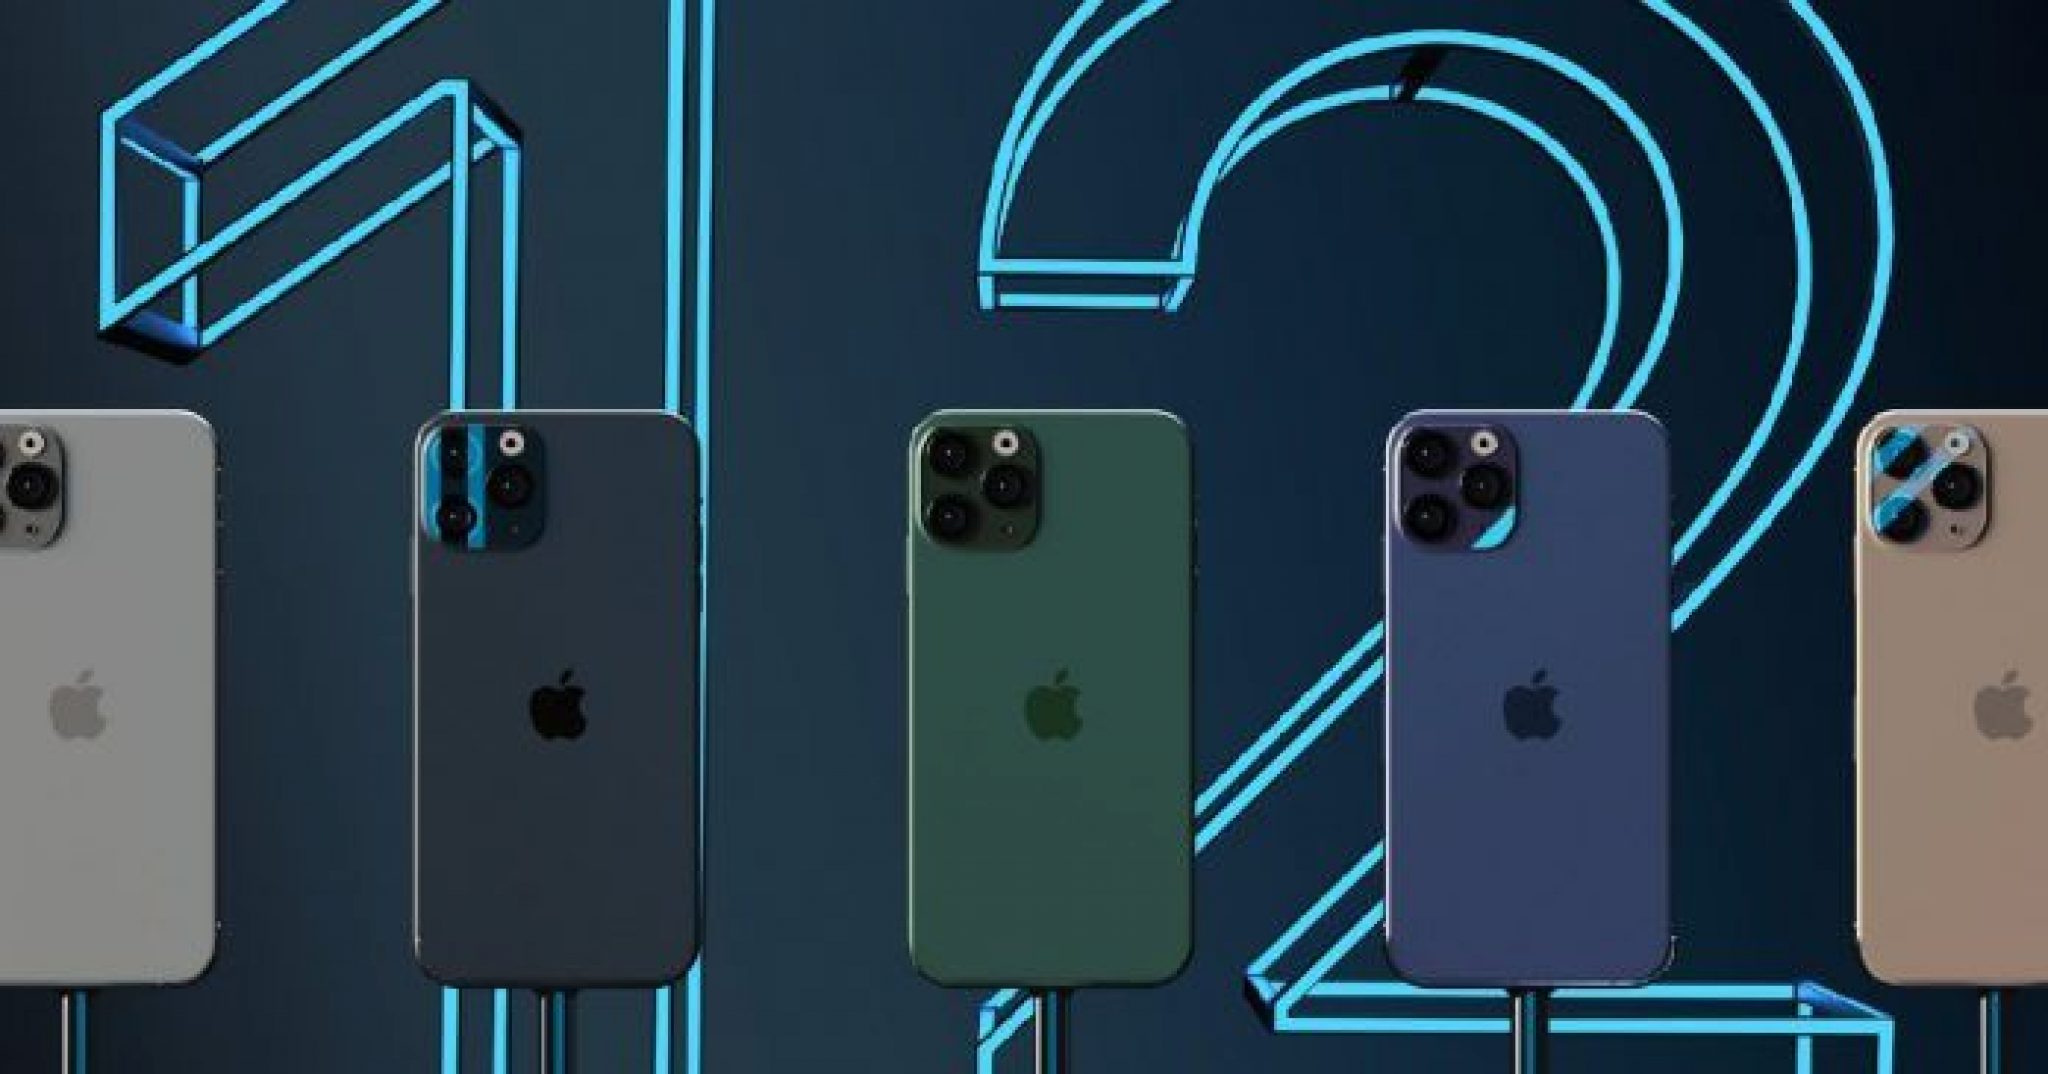 iphone 12 colors should you get purple or something else